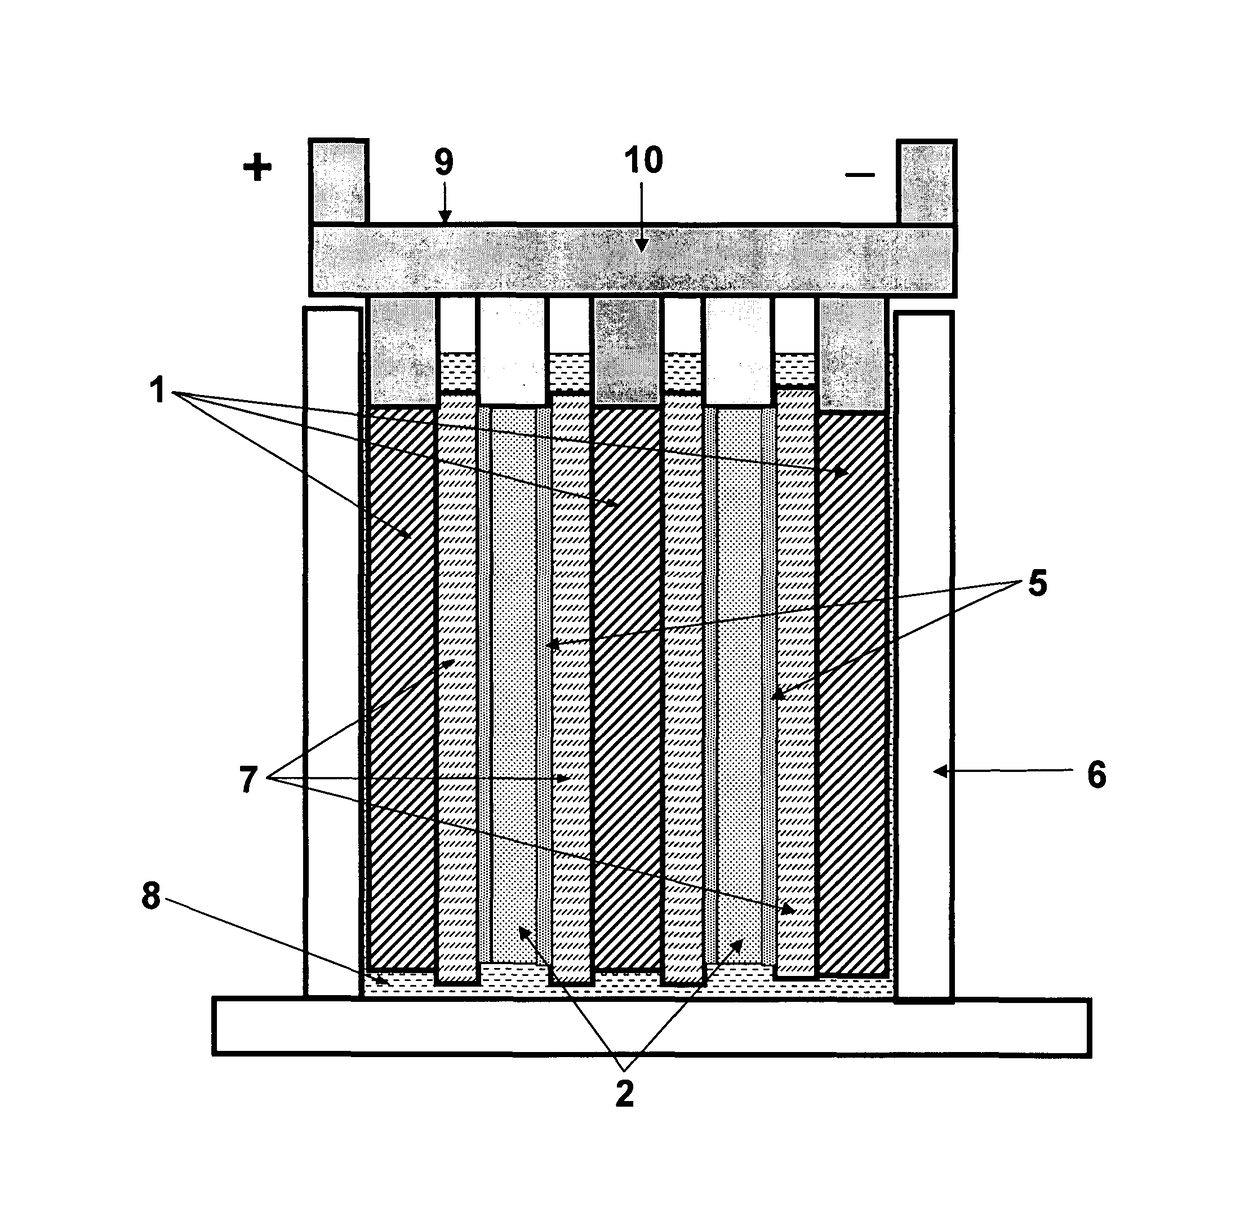 Optimised energy storage device having capacitor material on lead based negative electrode